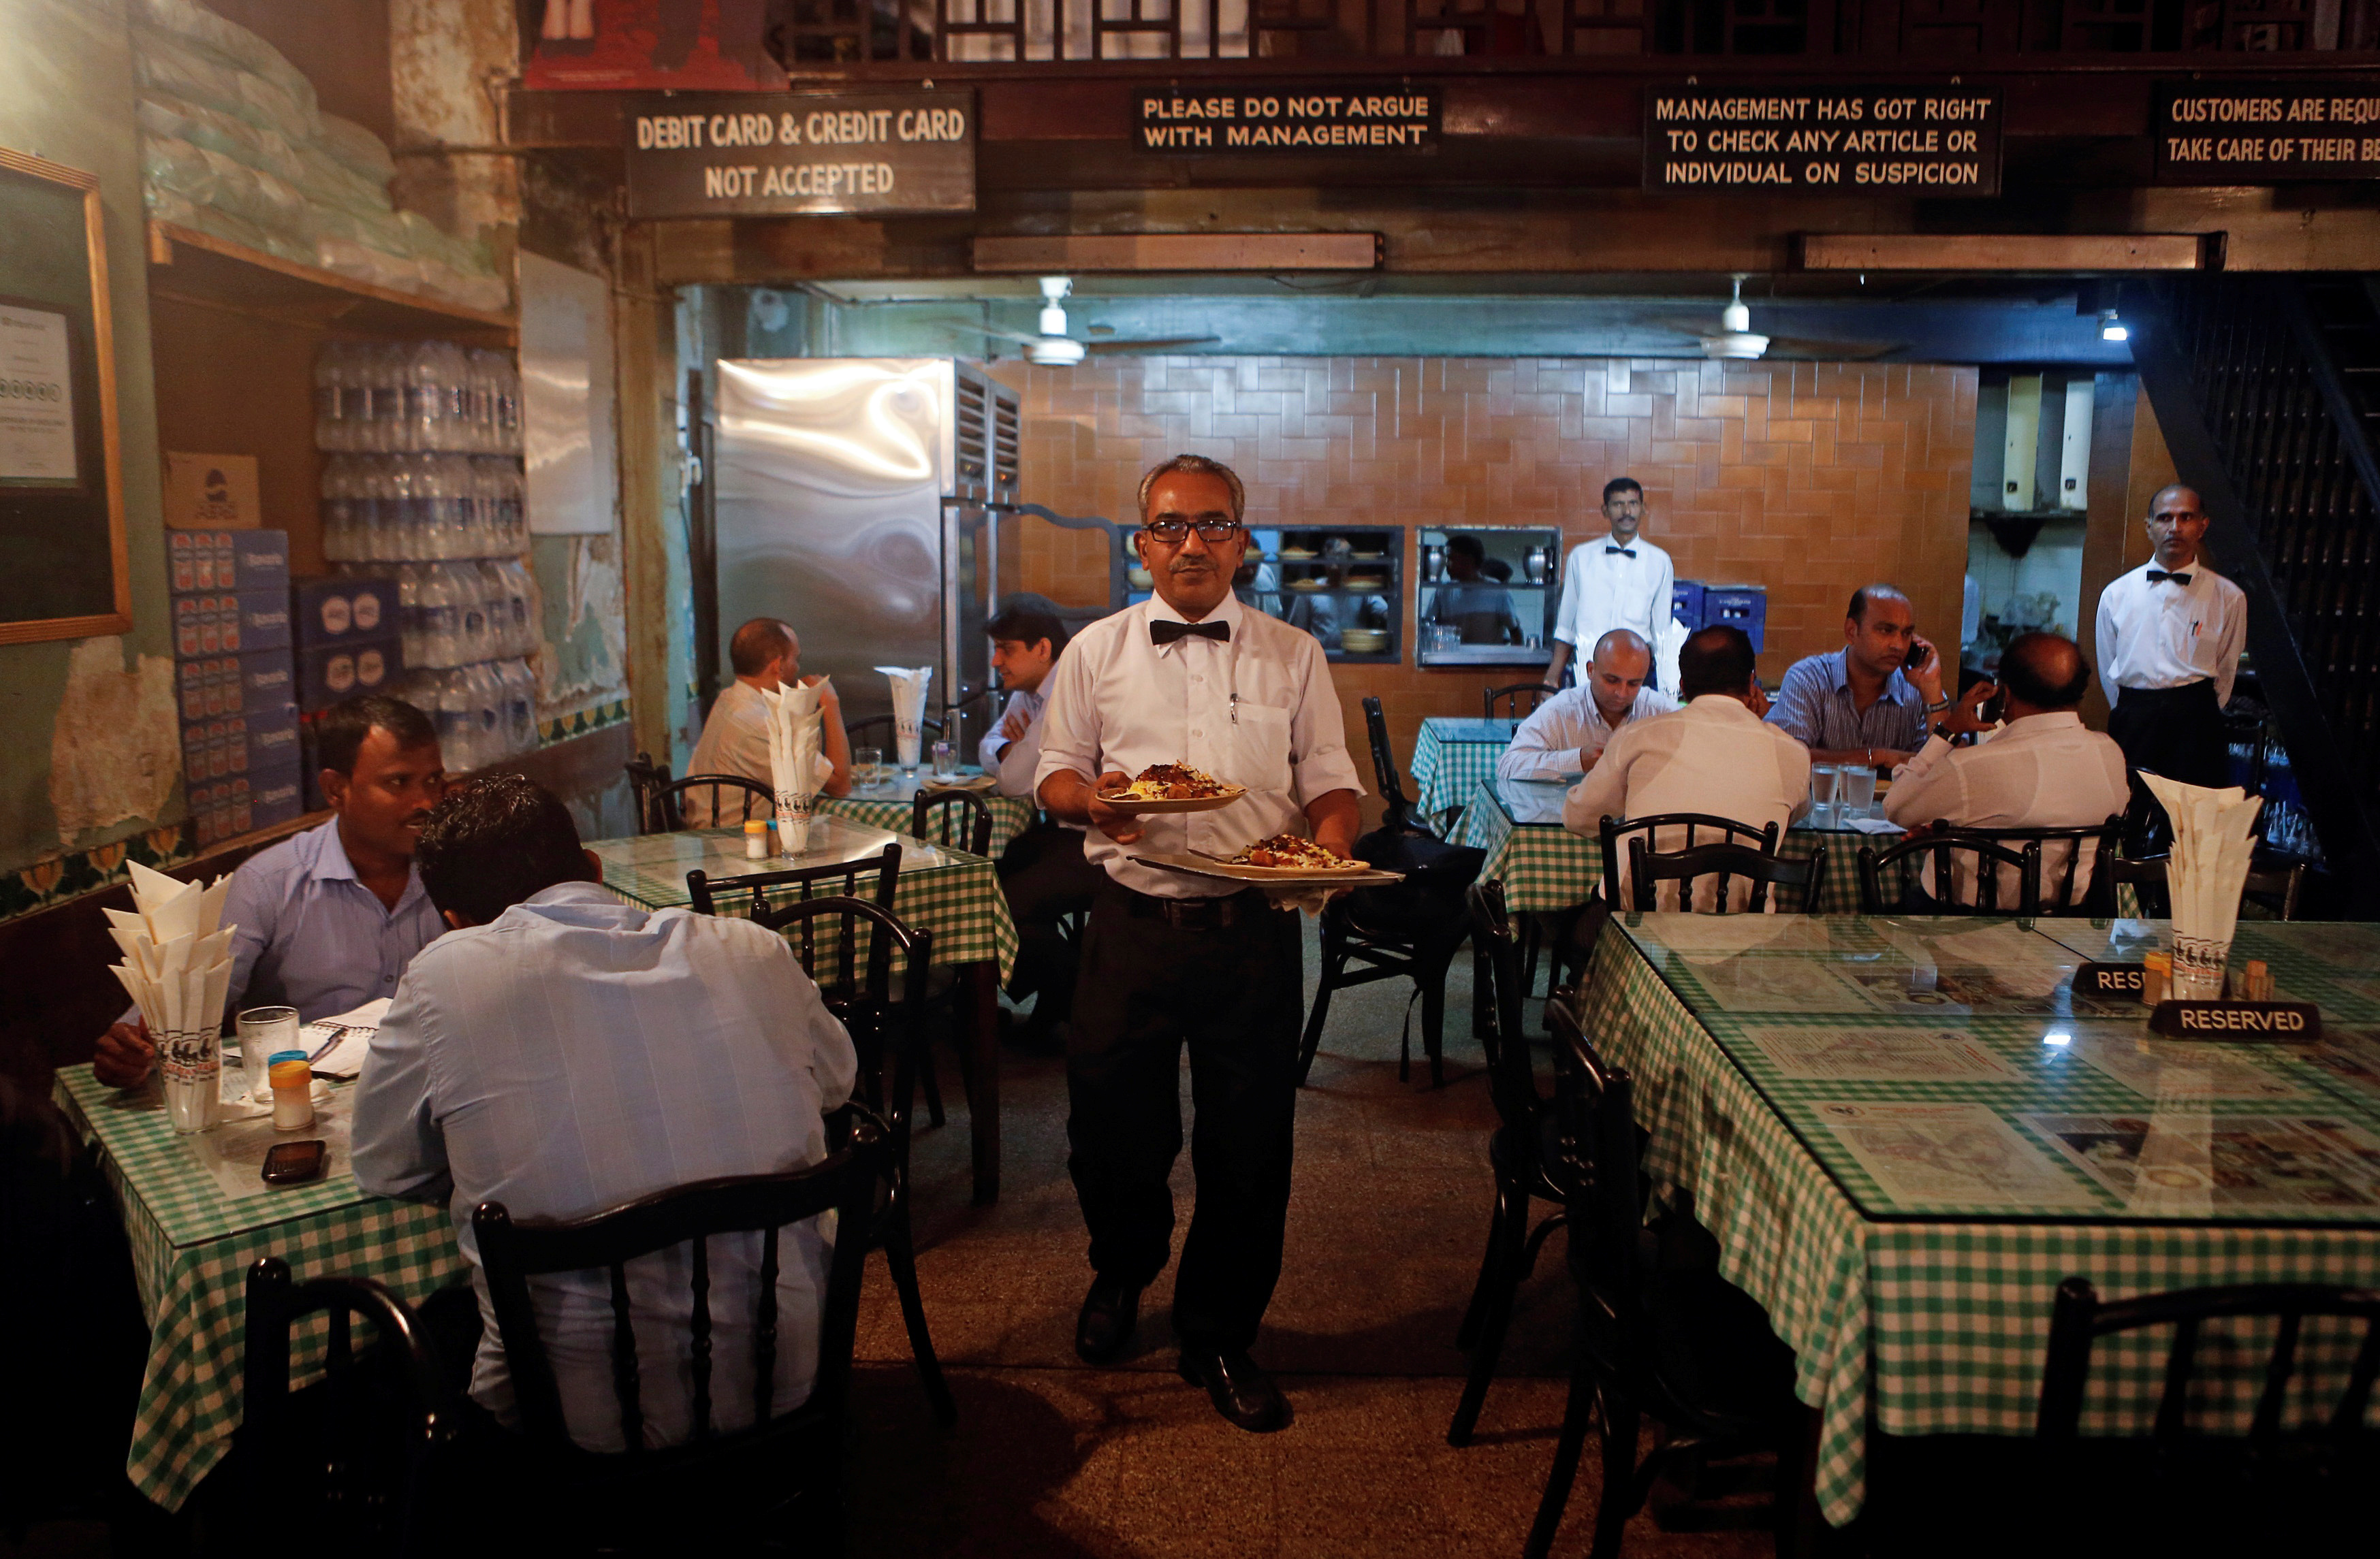 Waiter carries plates of food for customers at the Britannia and Co. restaurant in Mumbai